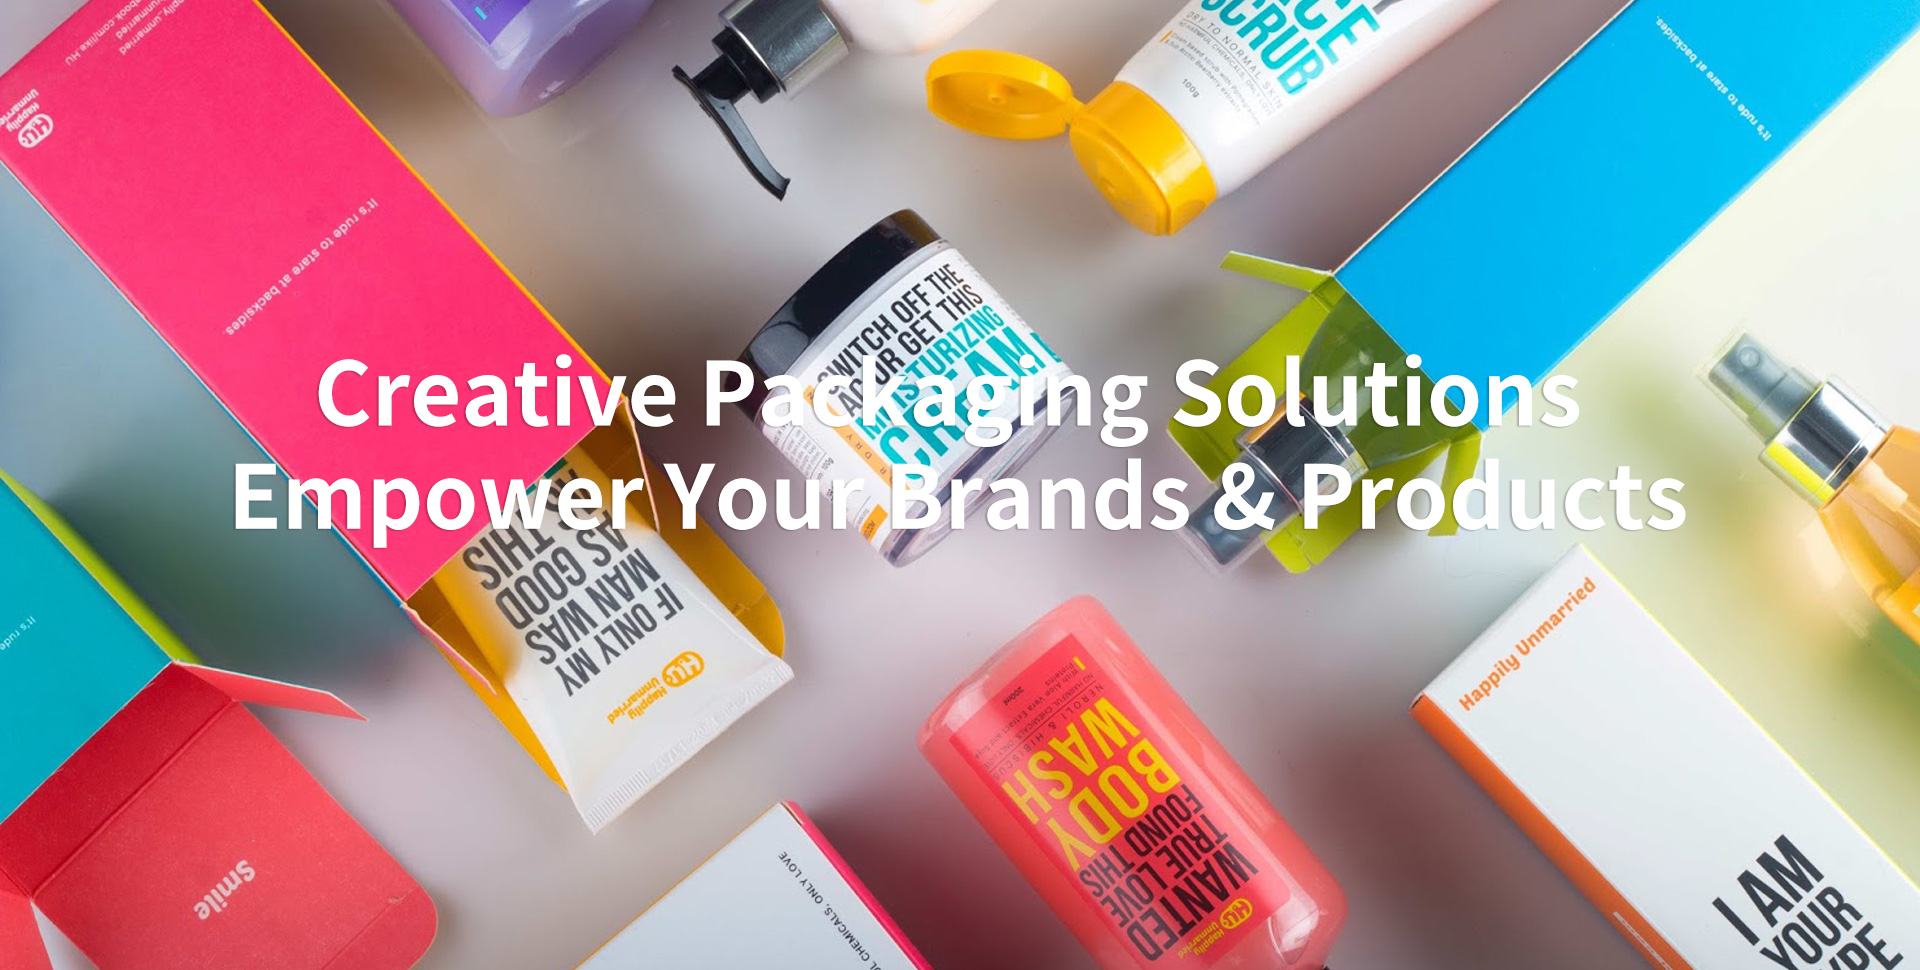  Creative Packaging Solutions 